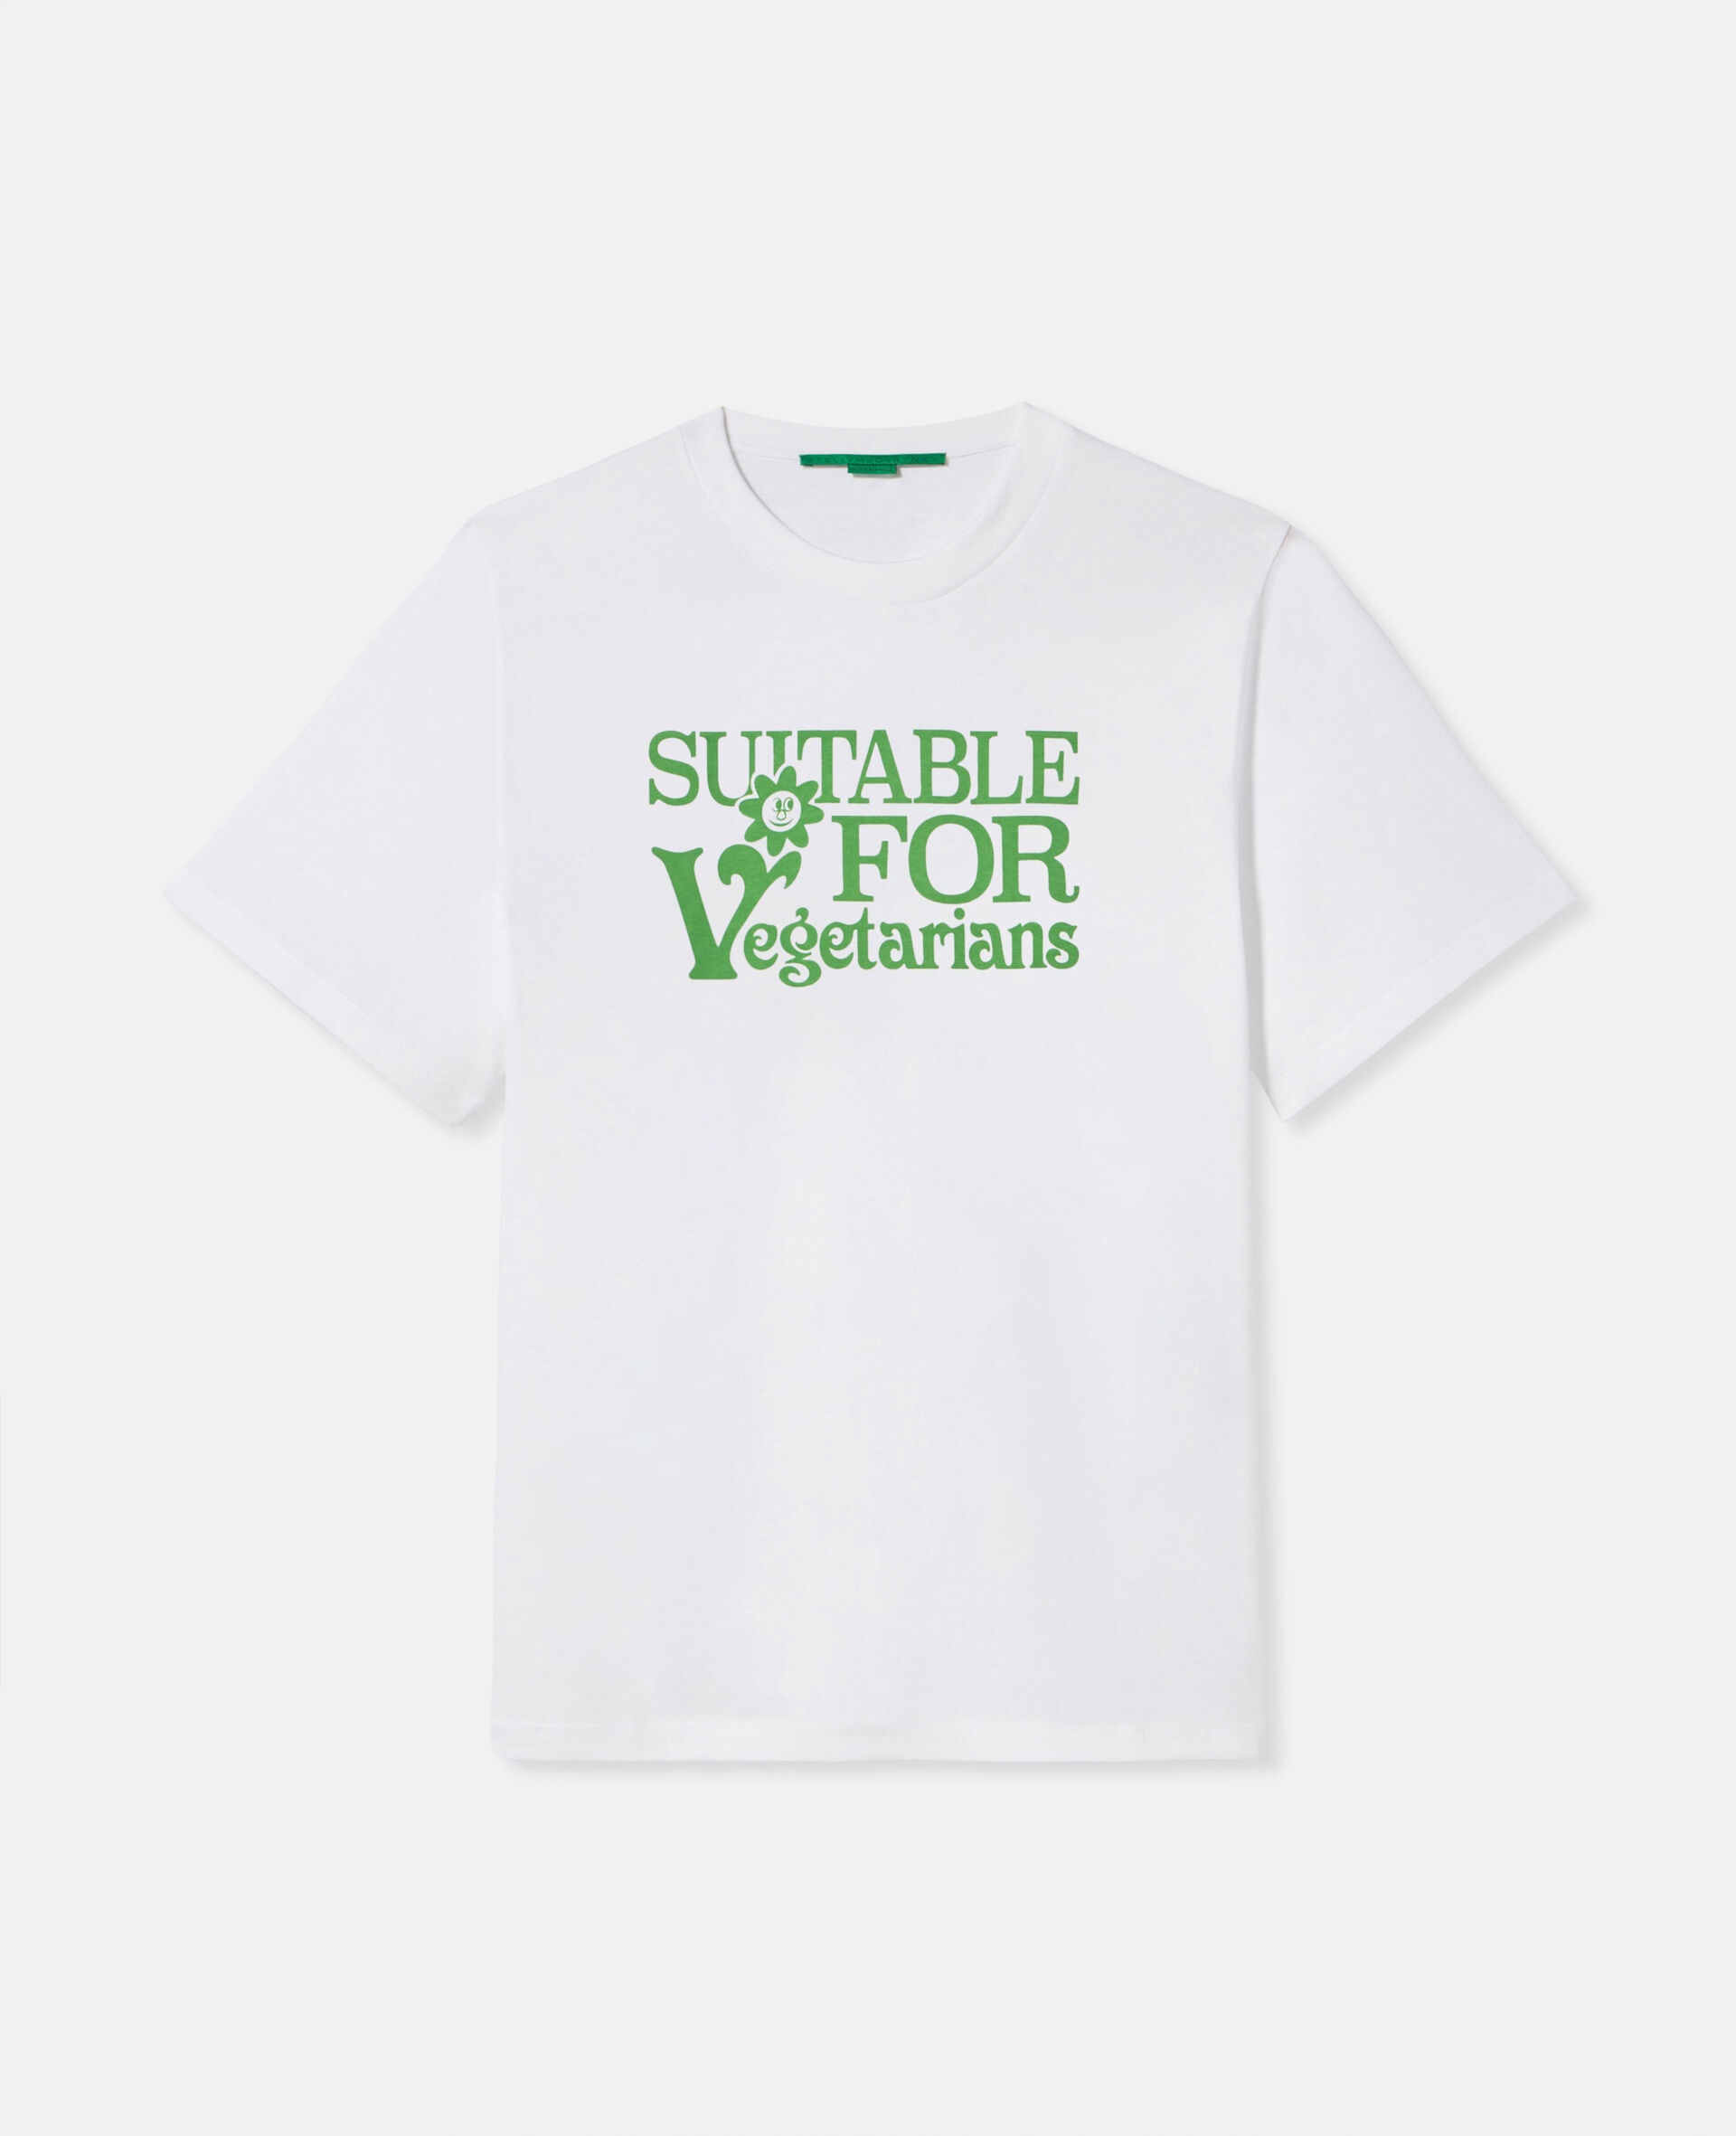 'Suitable for Vegetarians' Graphic T-Shirt - 1